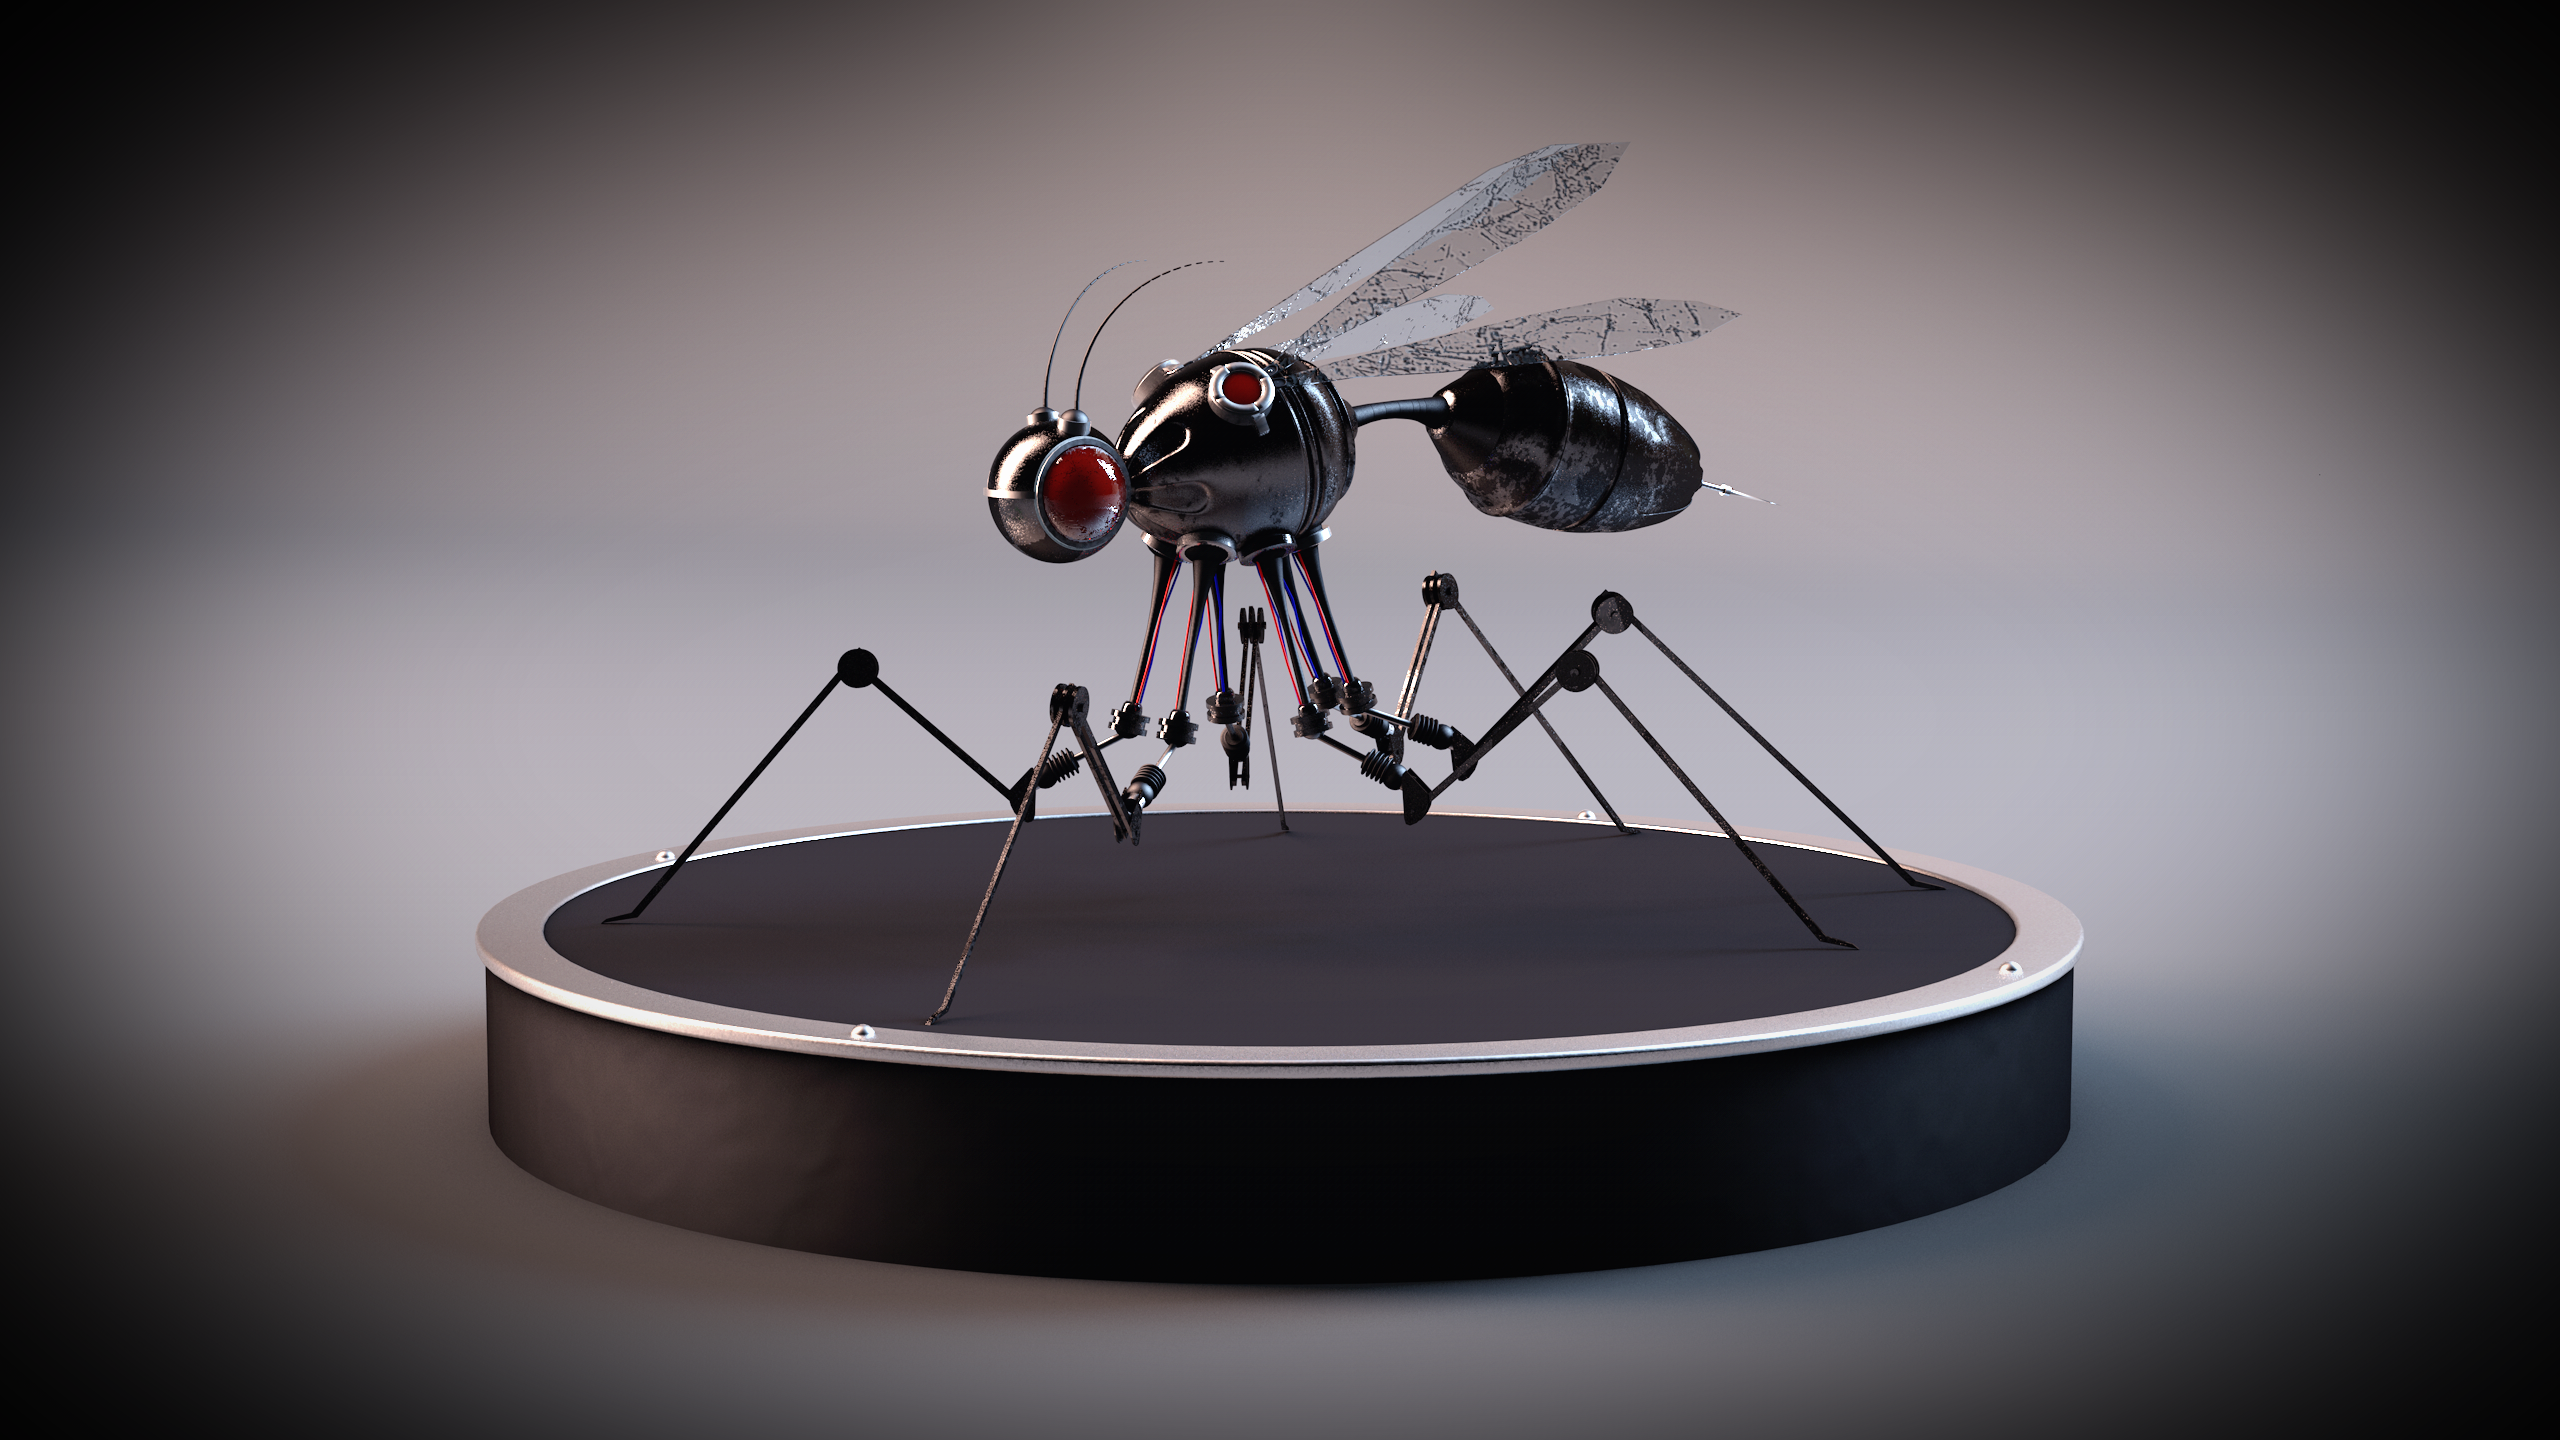 Robot Insect